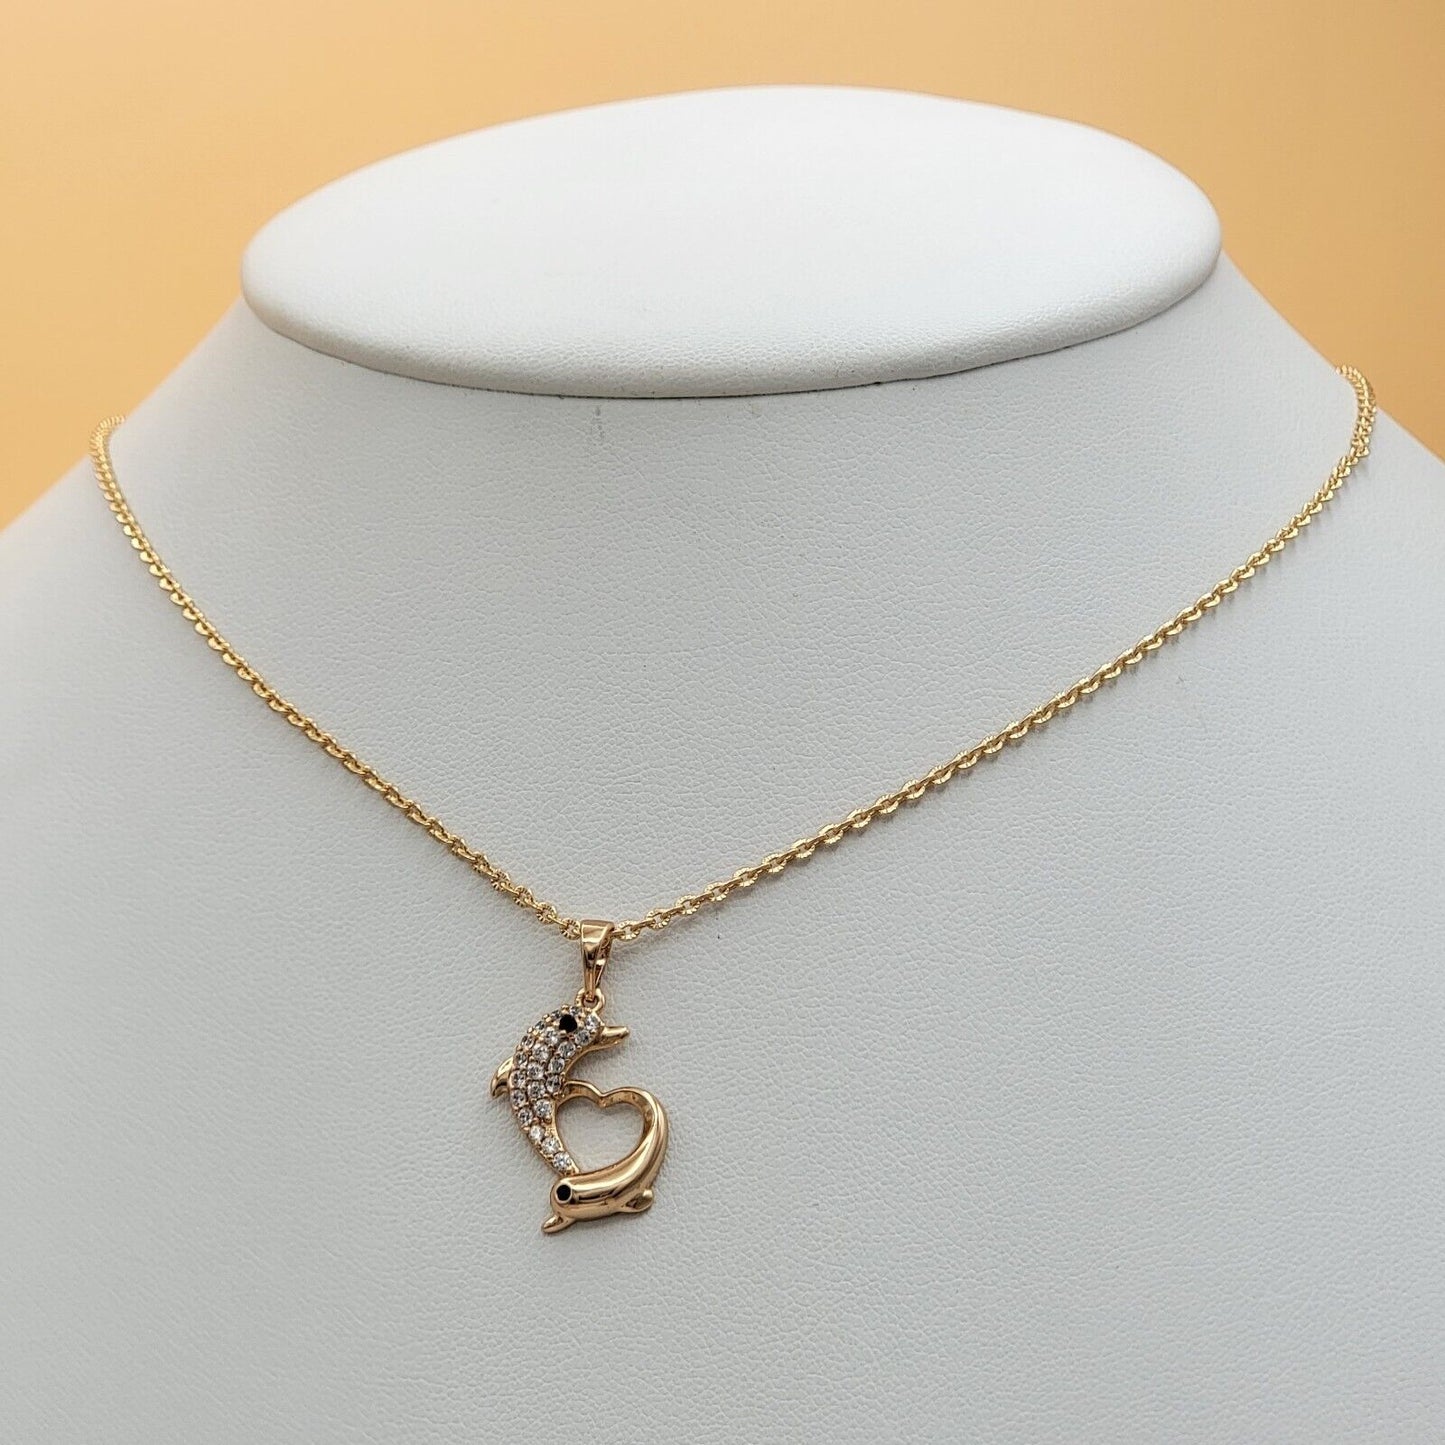 Necklaces - 18K Gold Plated. Heart Couple Dolphin Pendant & Chain.